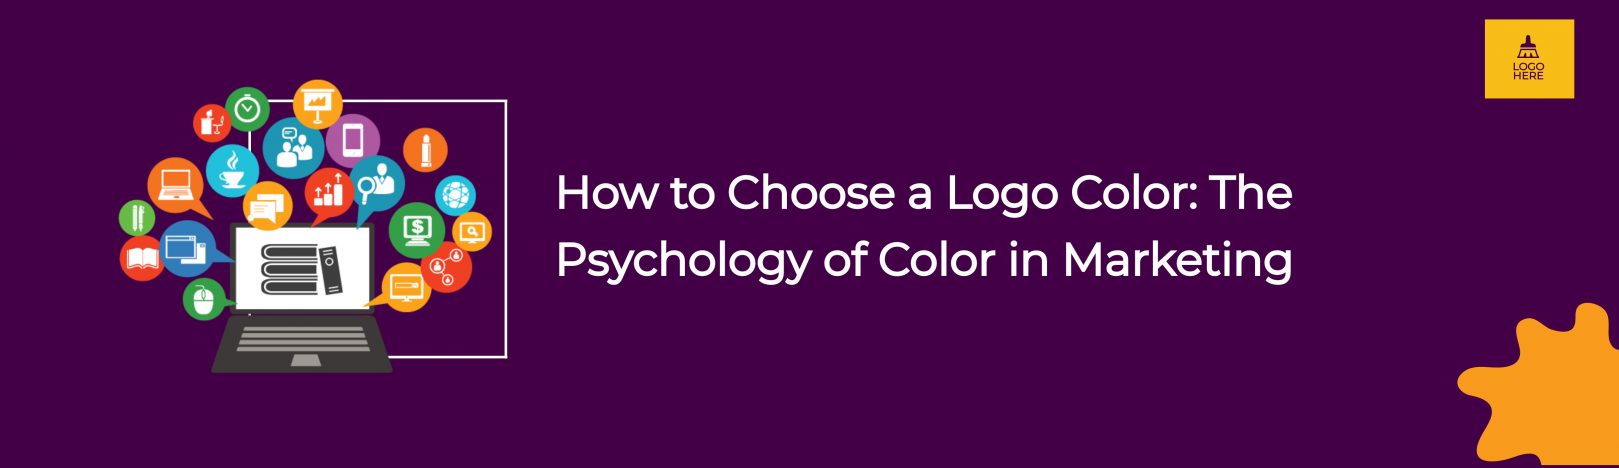 how-to-choose-a-logo-color-the-psychology-of-color-in-marketing